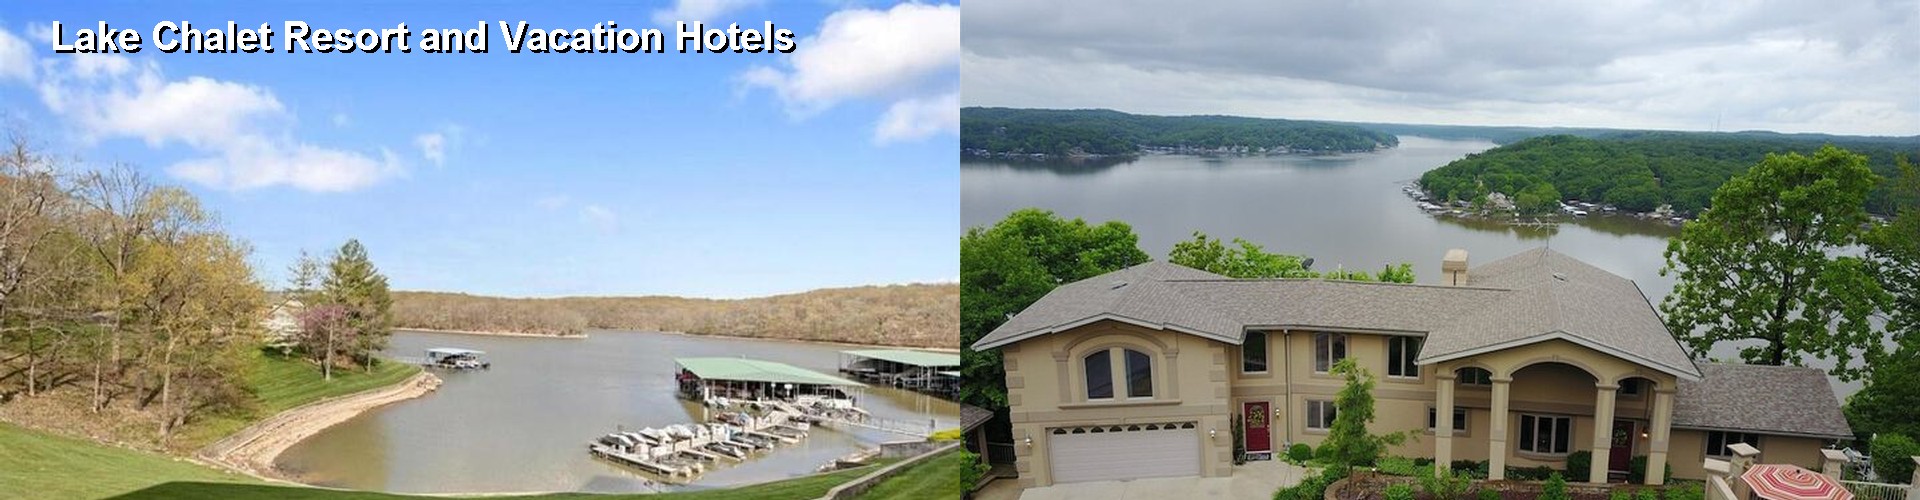 4 Best Hotels near Lake Chalet Resort and Vacation